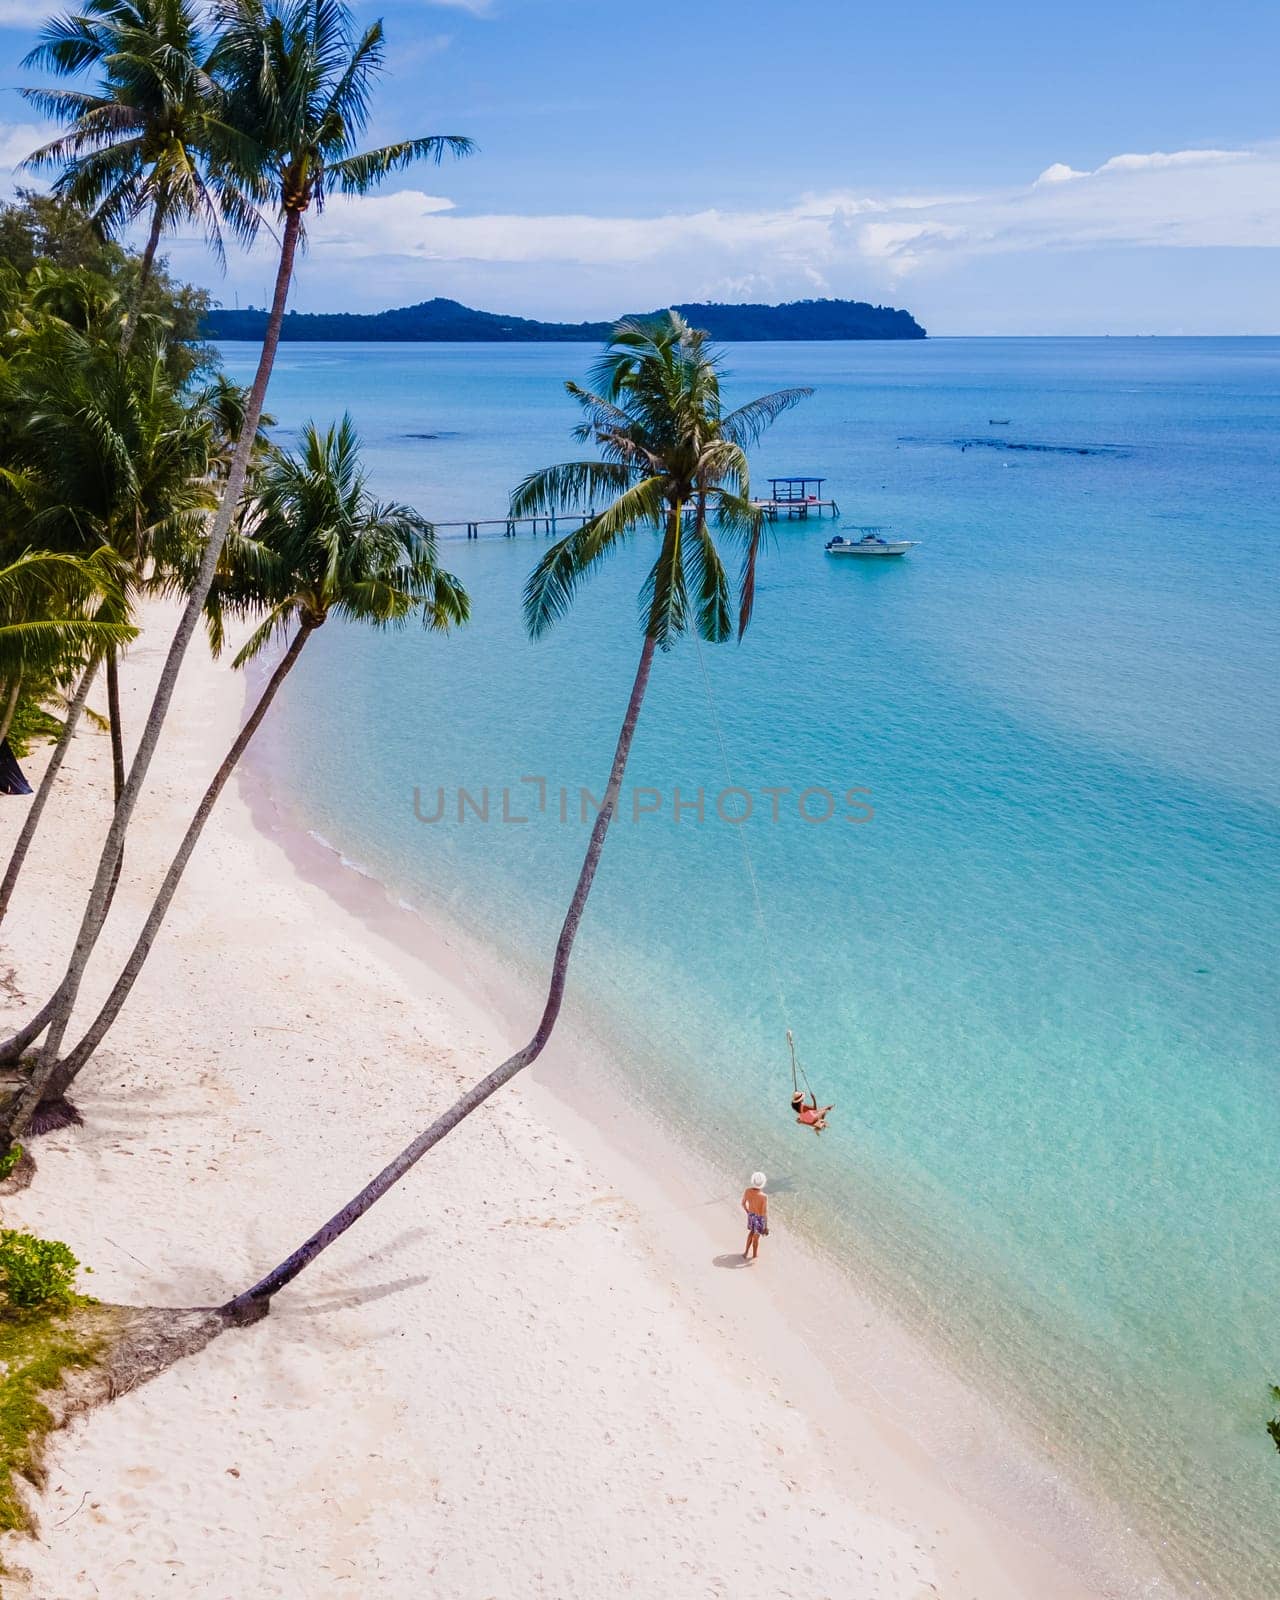 Tropical Island Koh Kood or Koh Kut Thailand. Couple men and women on vacation in Thailand playing with a swing on the beach, holiday concept Island hopping in Eastern Thailand Trang